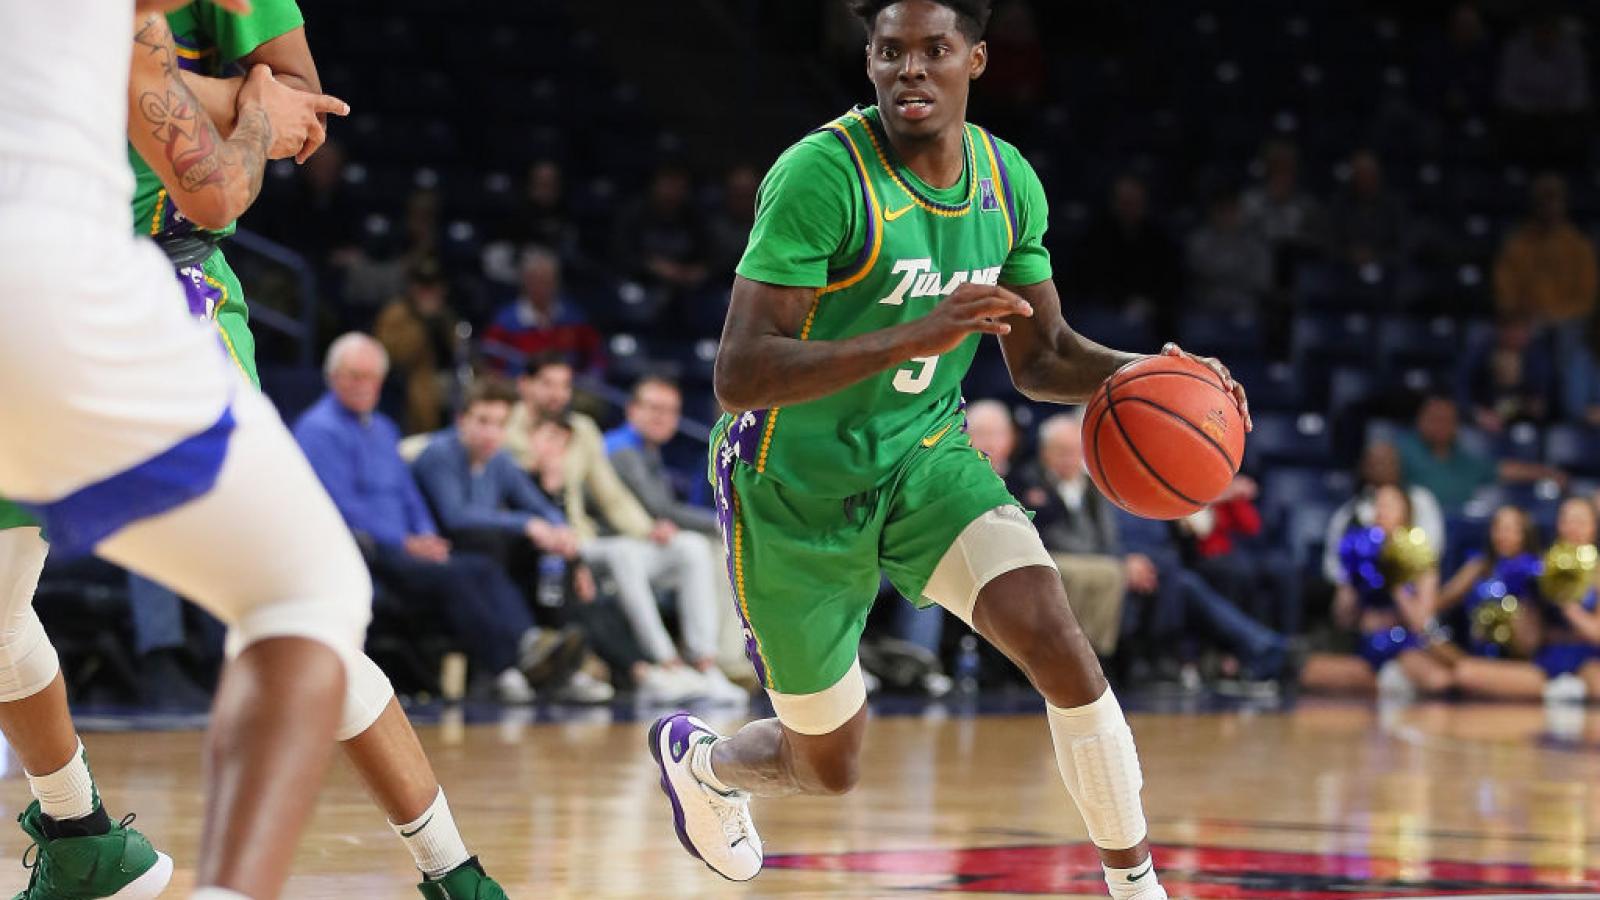 Tulane basketball star charged in connection with fatal shooting | Just